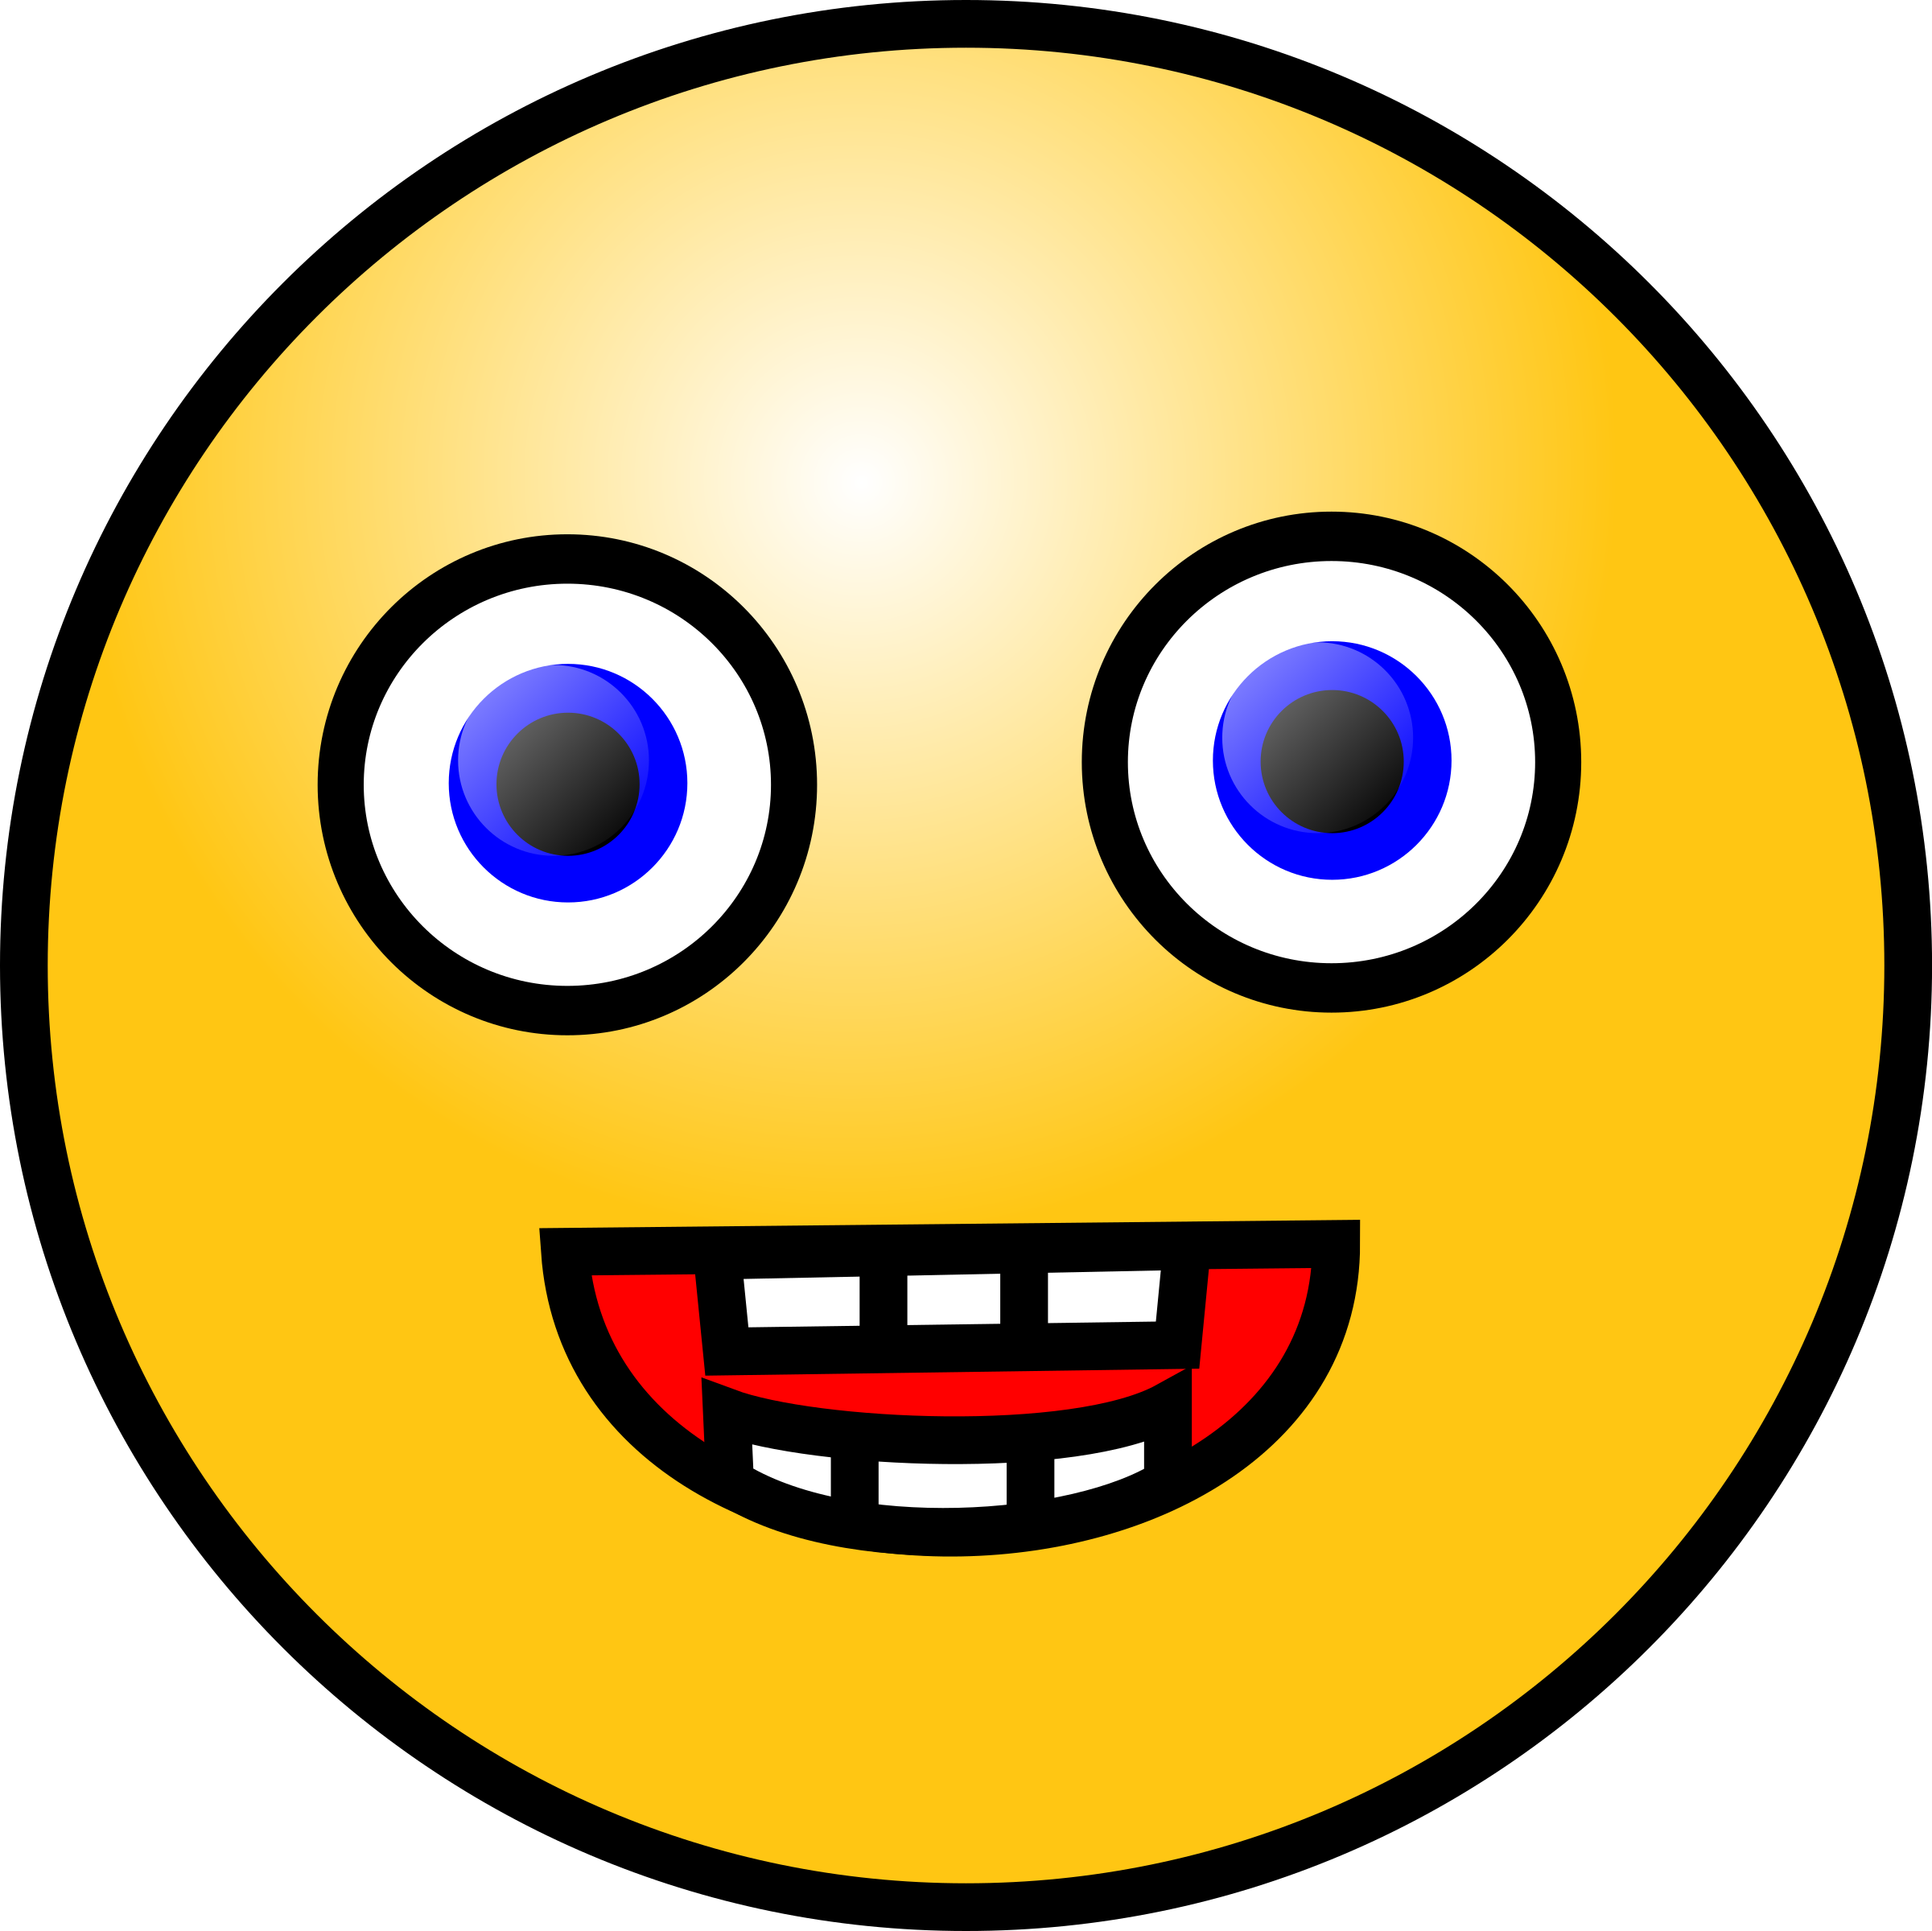 Laughing Smiley Face Emoticon  Free download on ClipArtMag